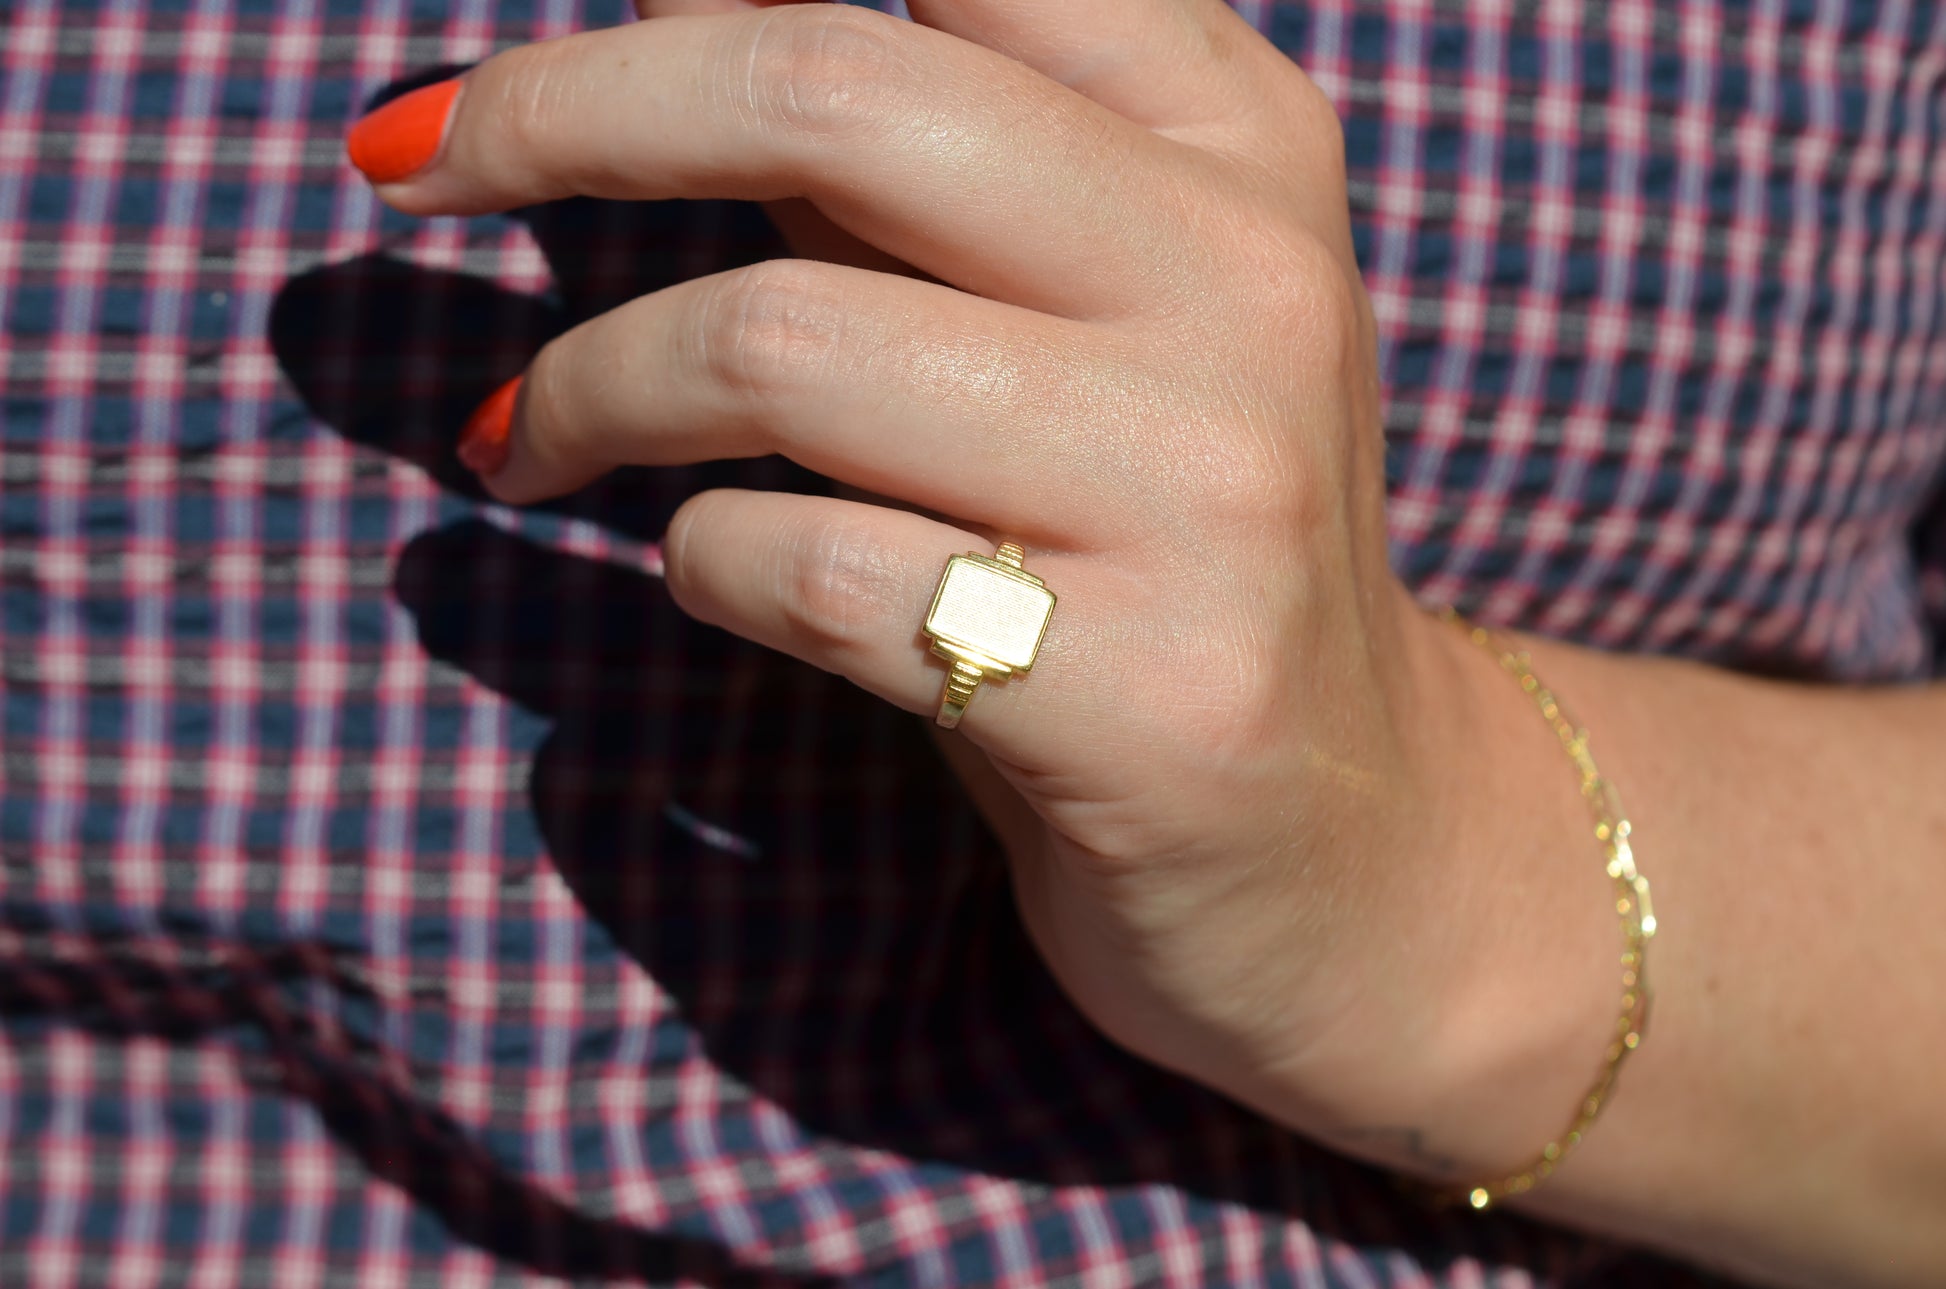 A medium-close view of the ring on a Caucasian model's left pinky finger. The model has bright orangey-red short nails and is wearing a red and blue gingham blouse.